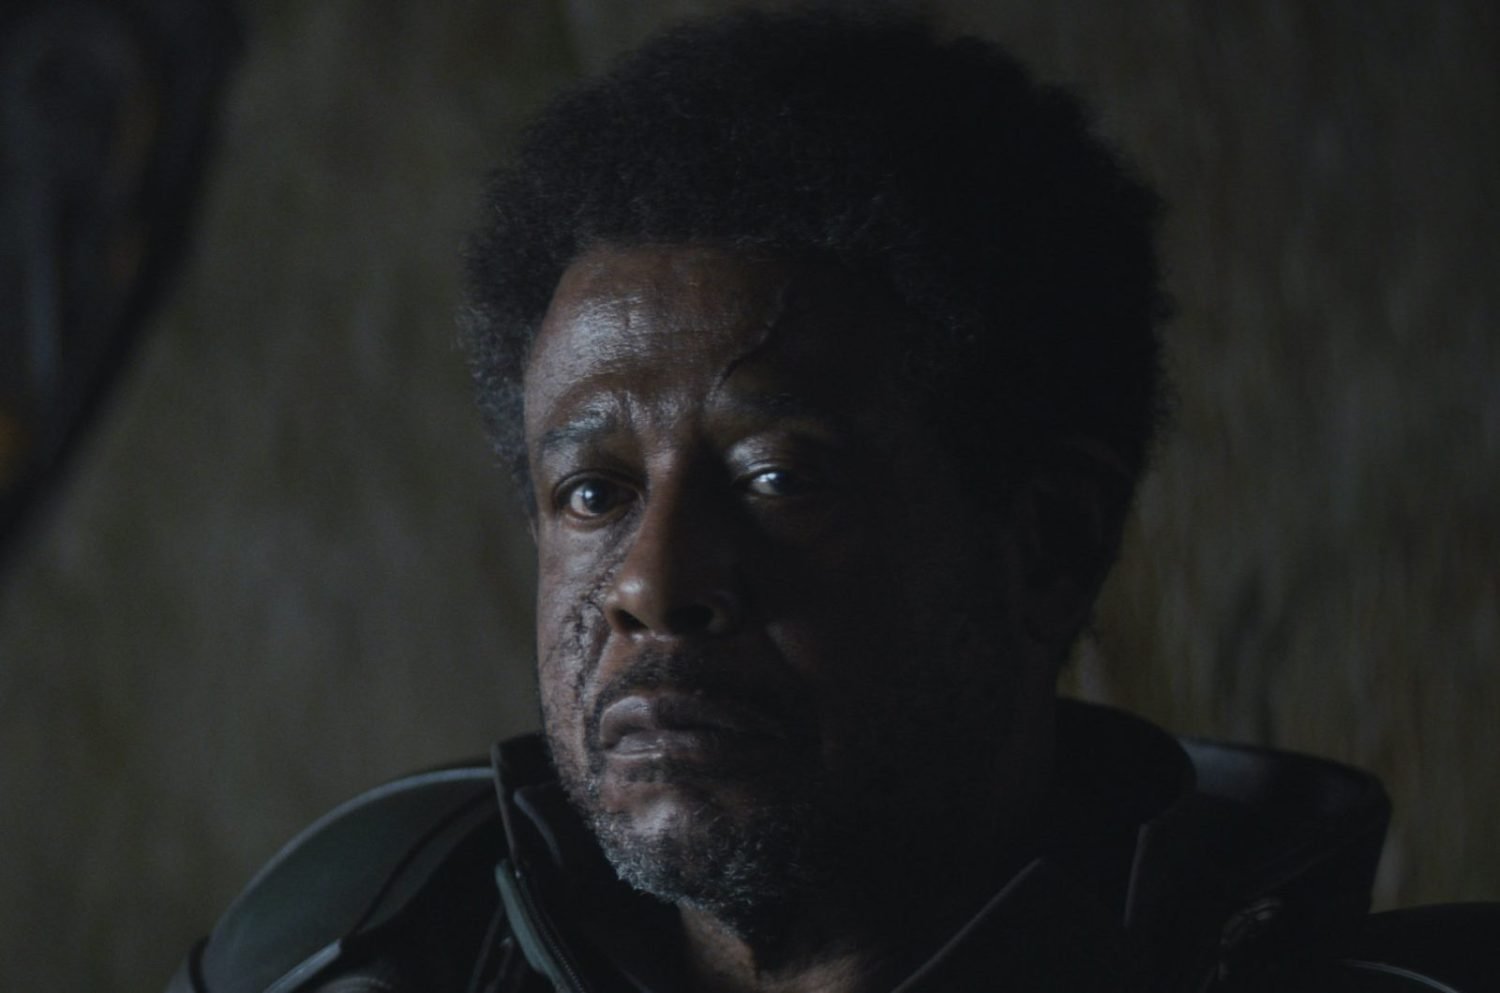 Forest Whitaker as Saw Gerrera - Andor